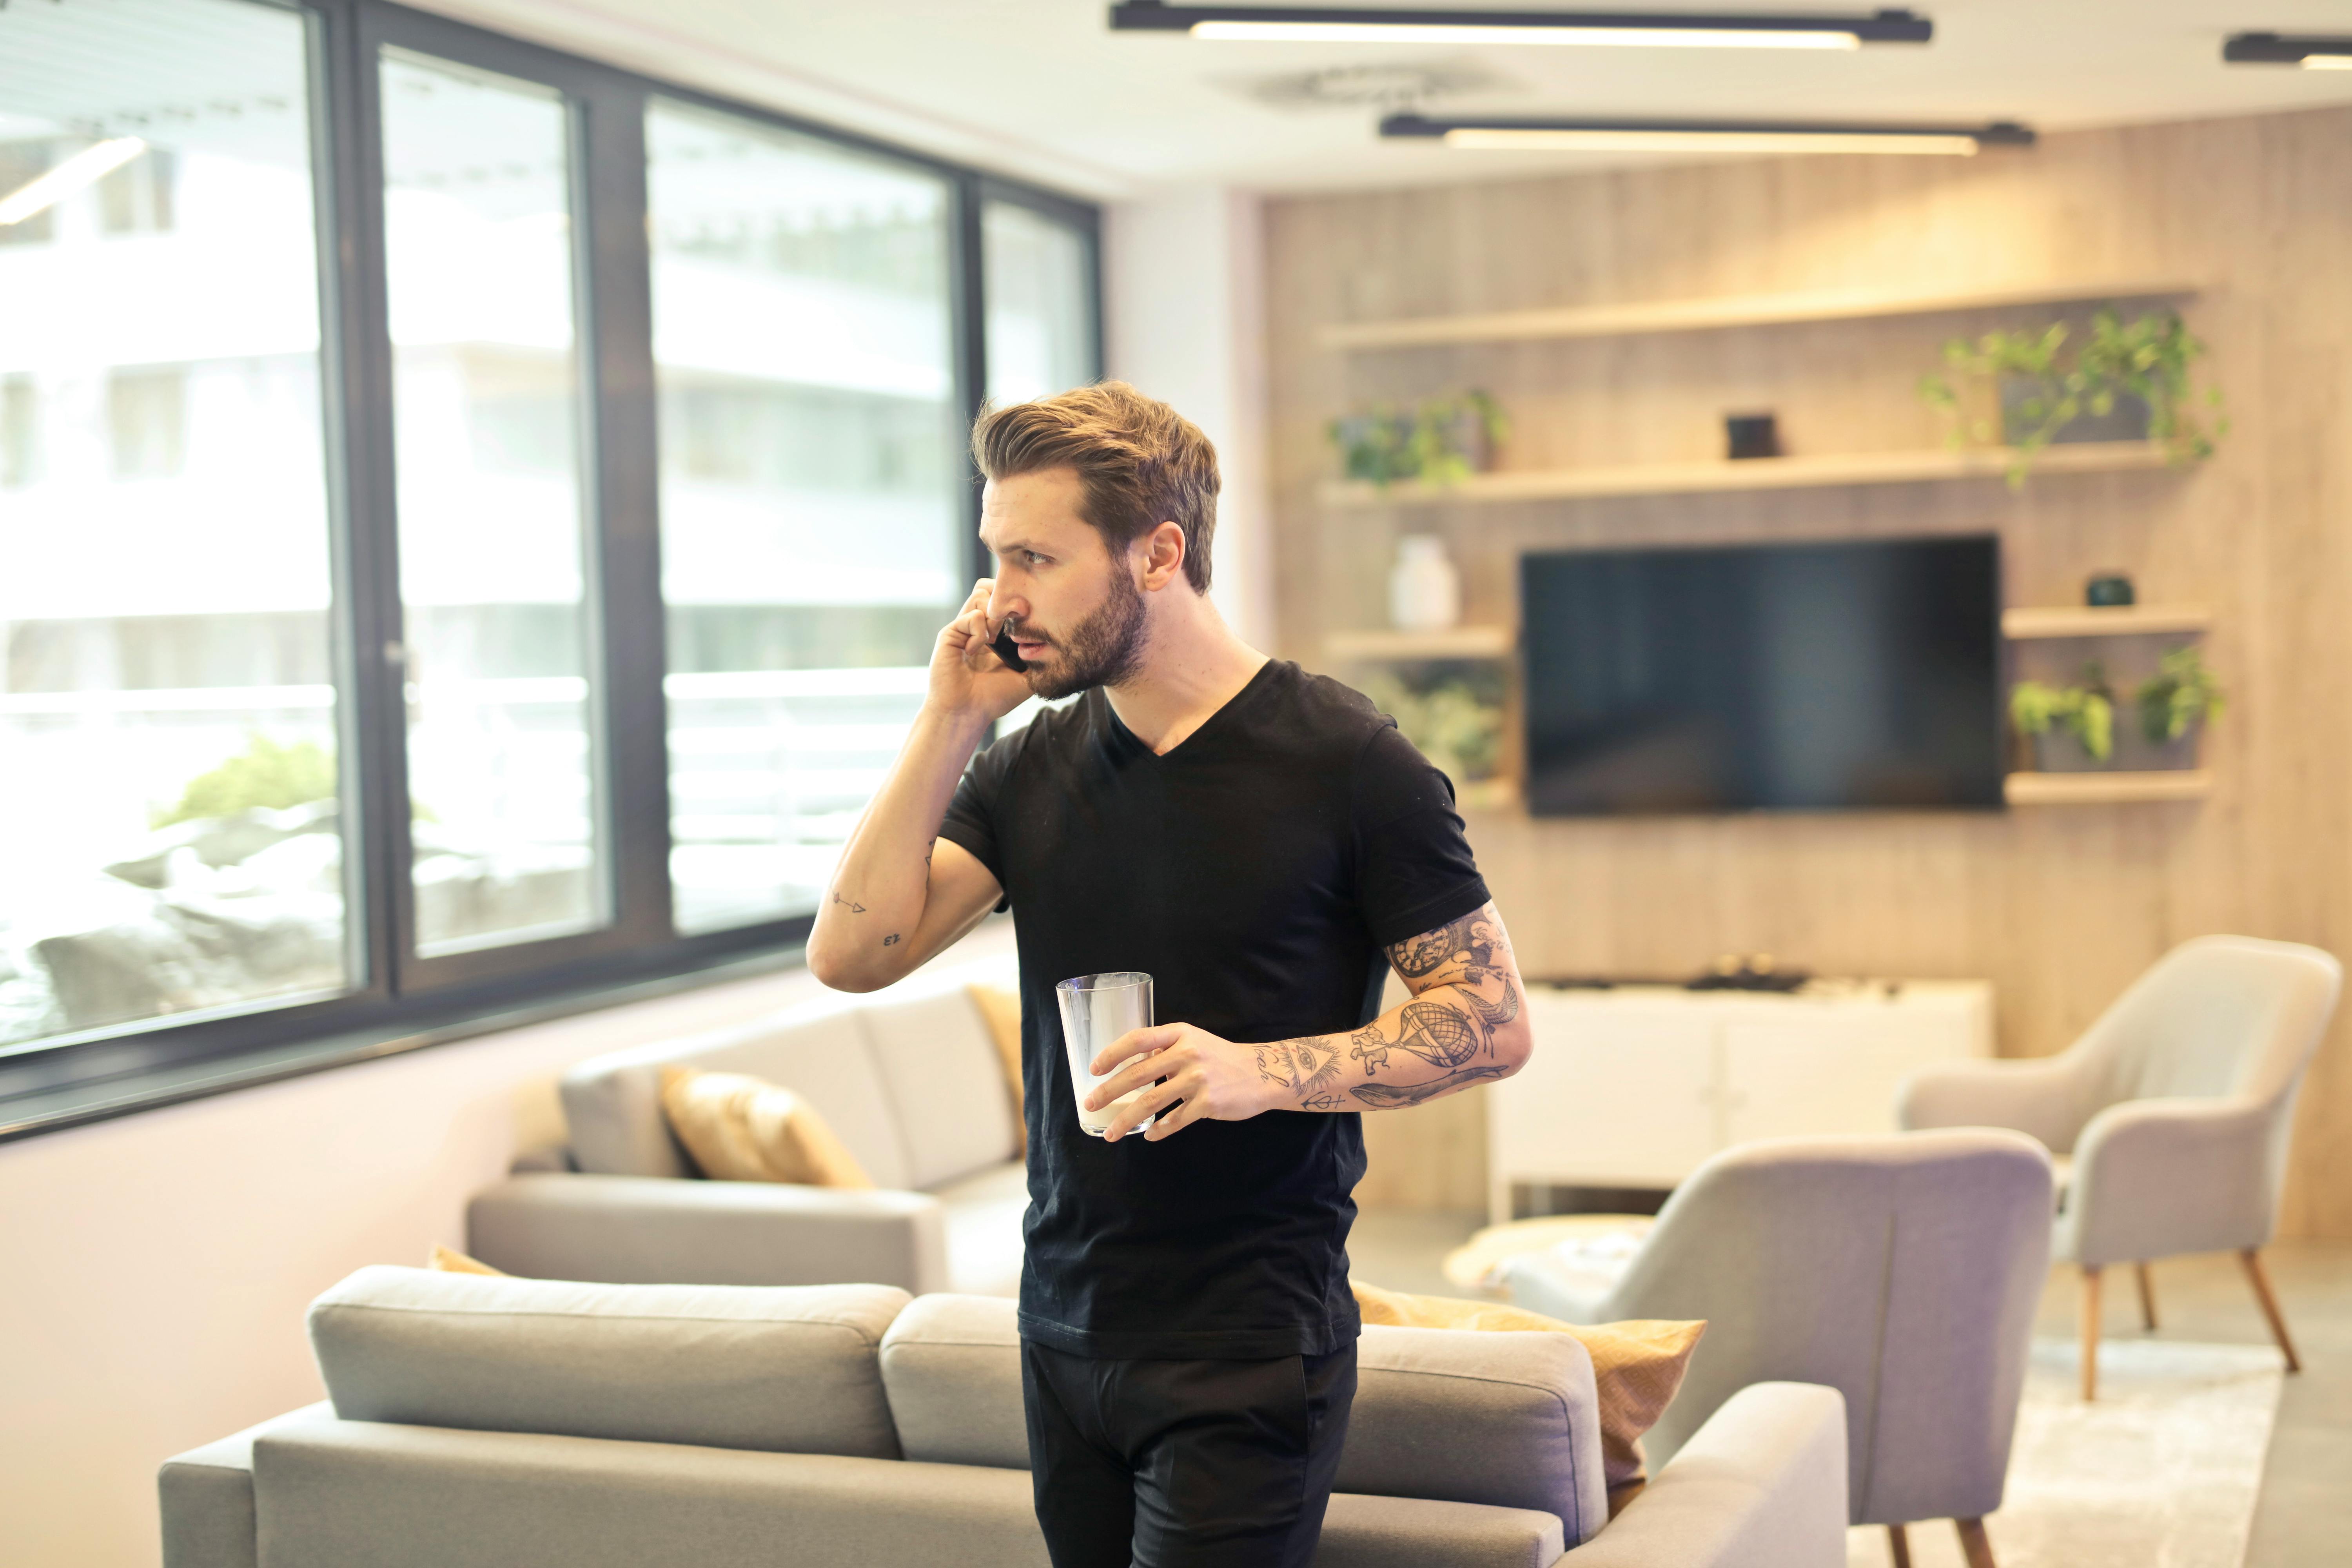 A man on a phone call | Source: Pexels